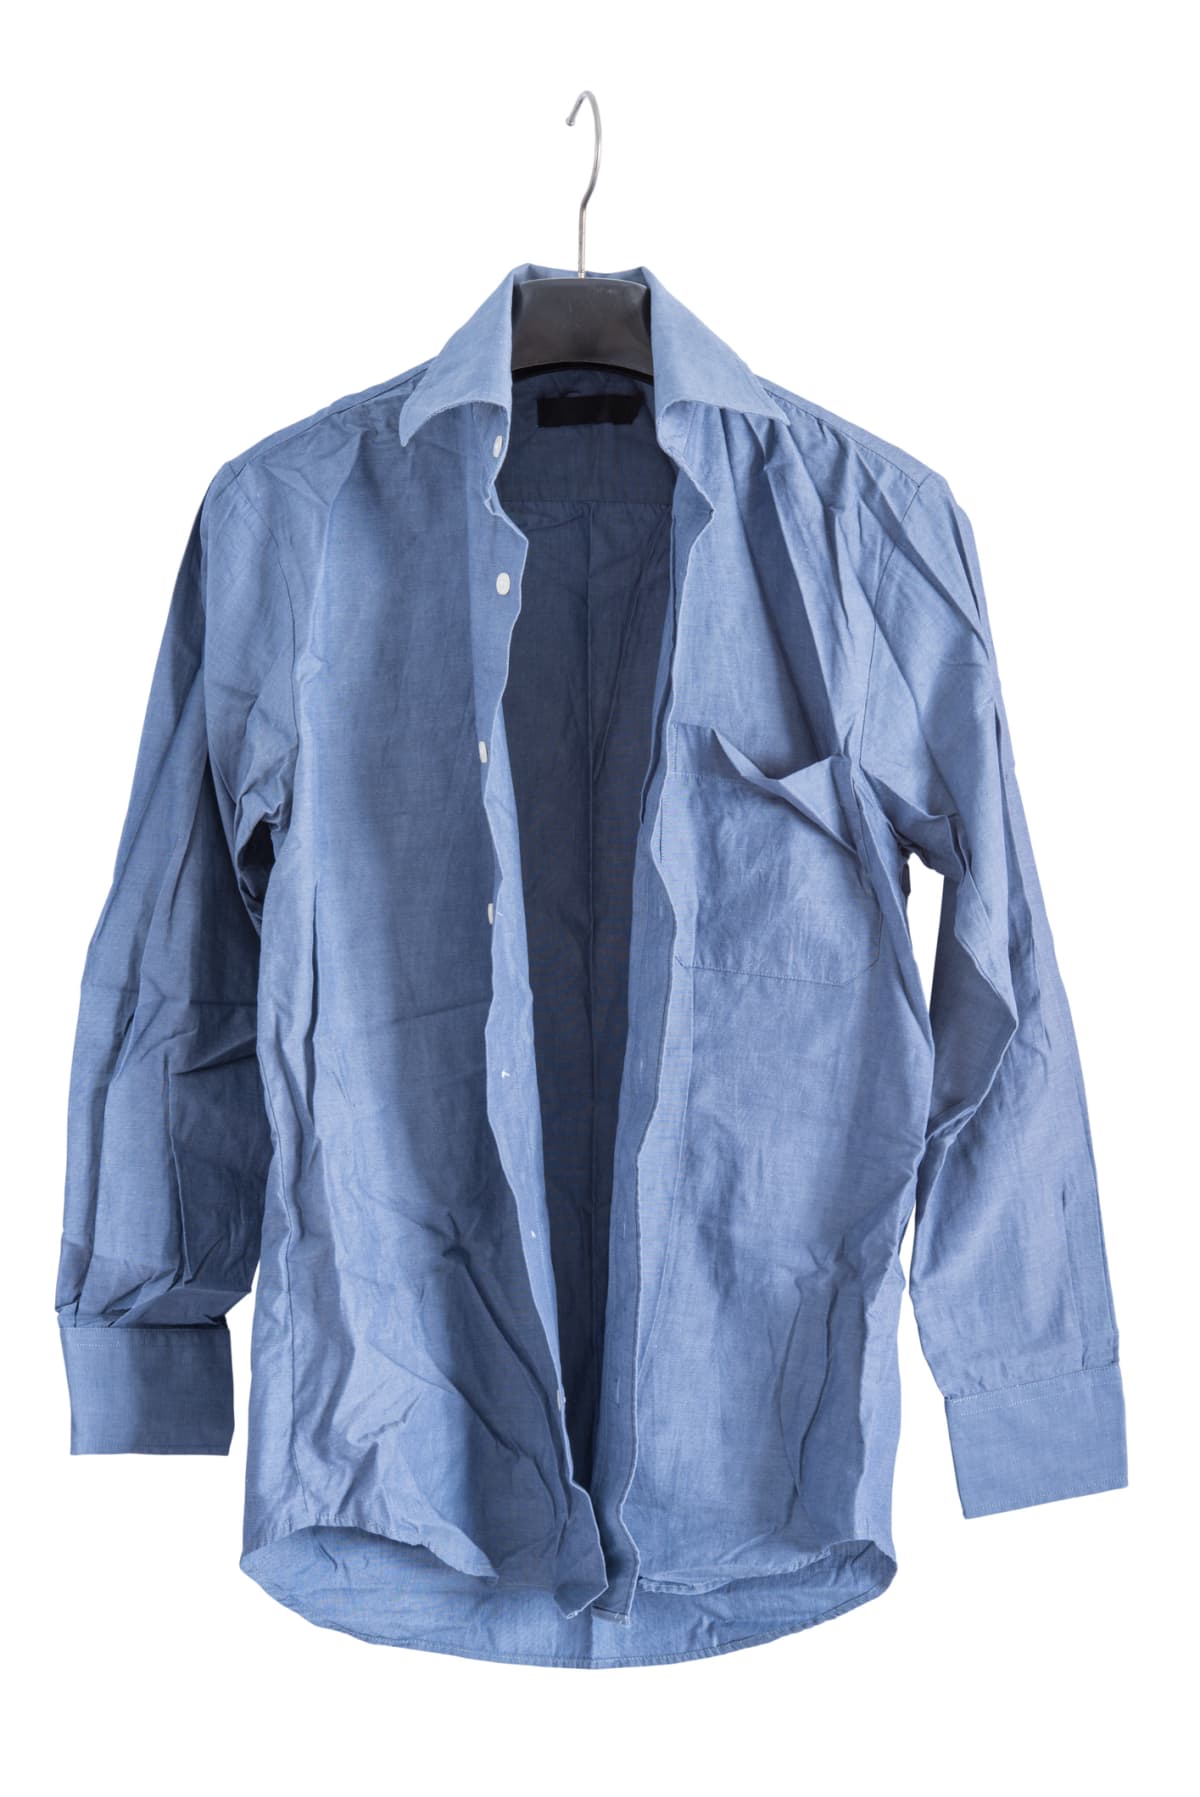 Creased blue shirt hanging on a hook